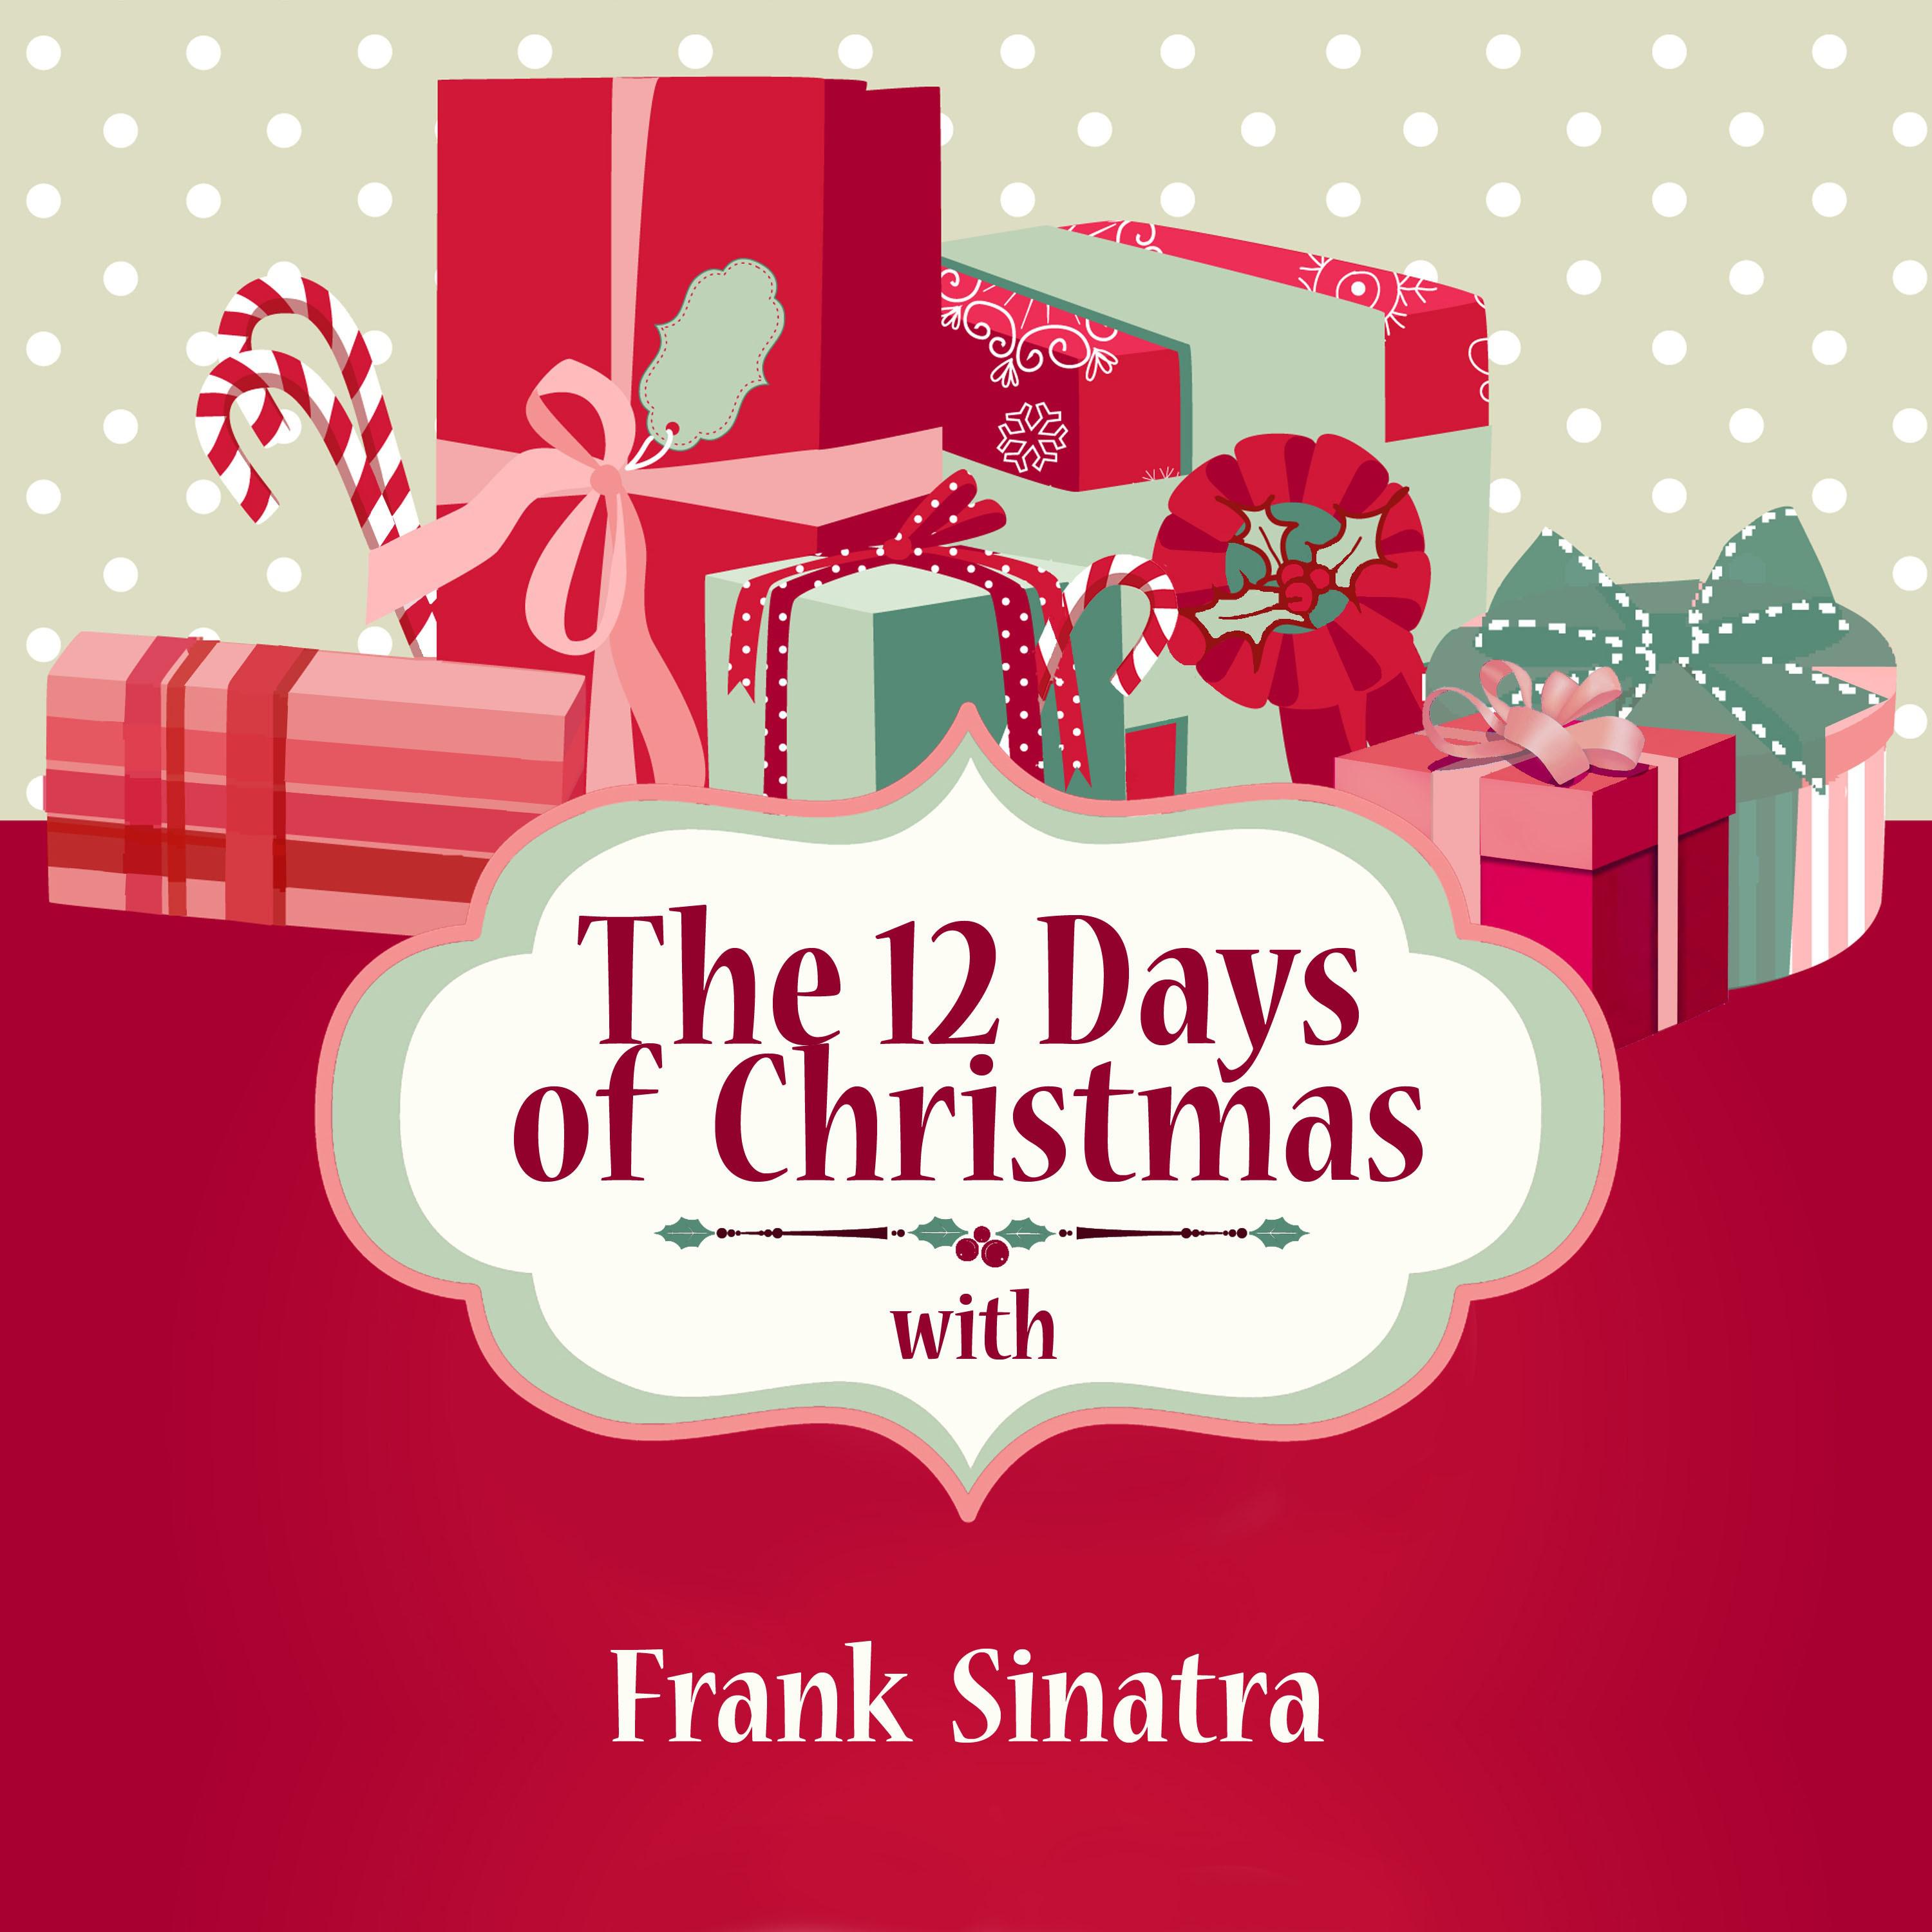 The 12 Days of Christmas with Frank Sinatra